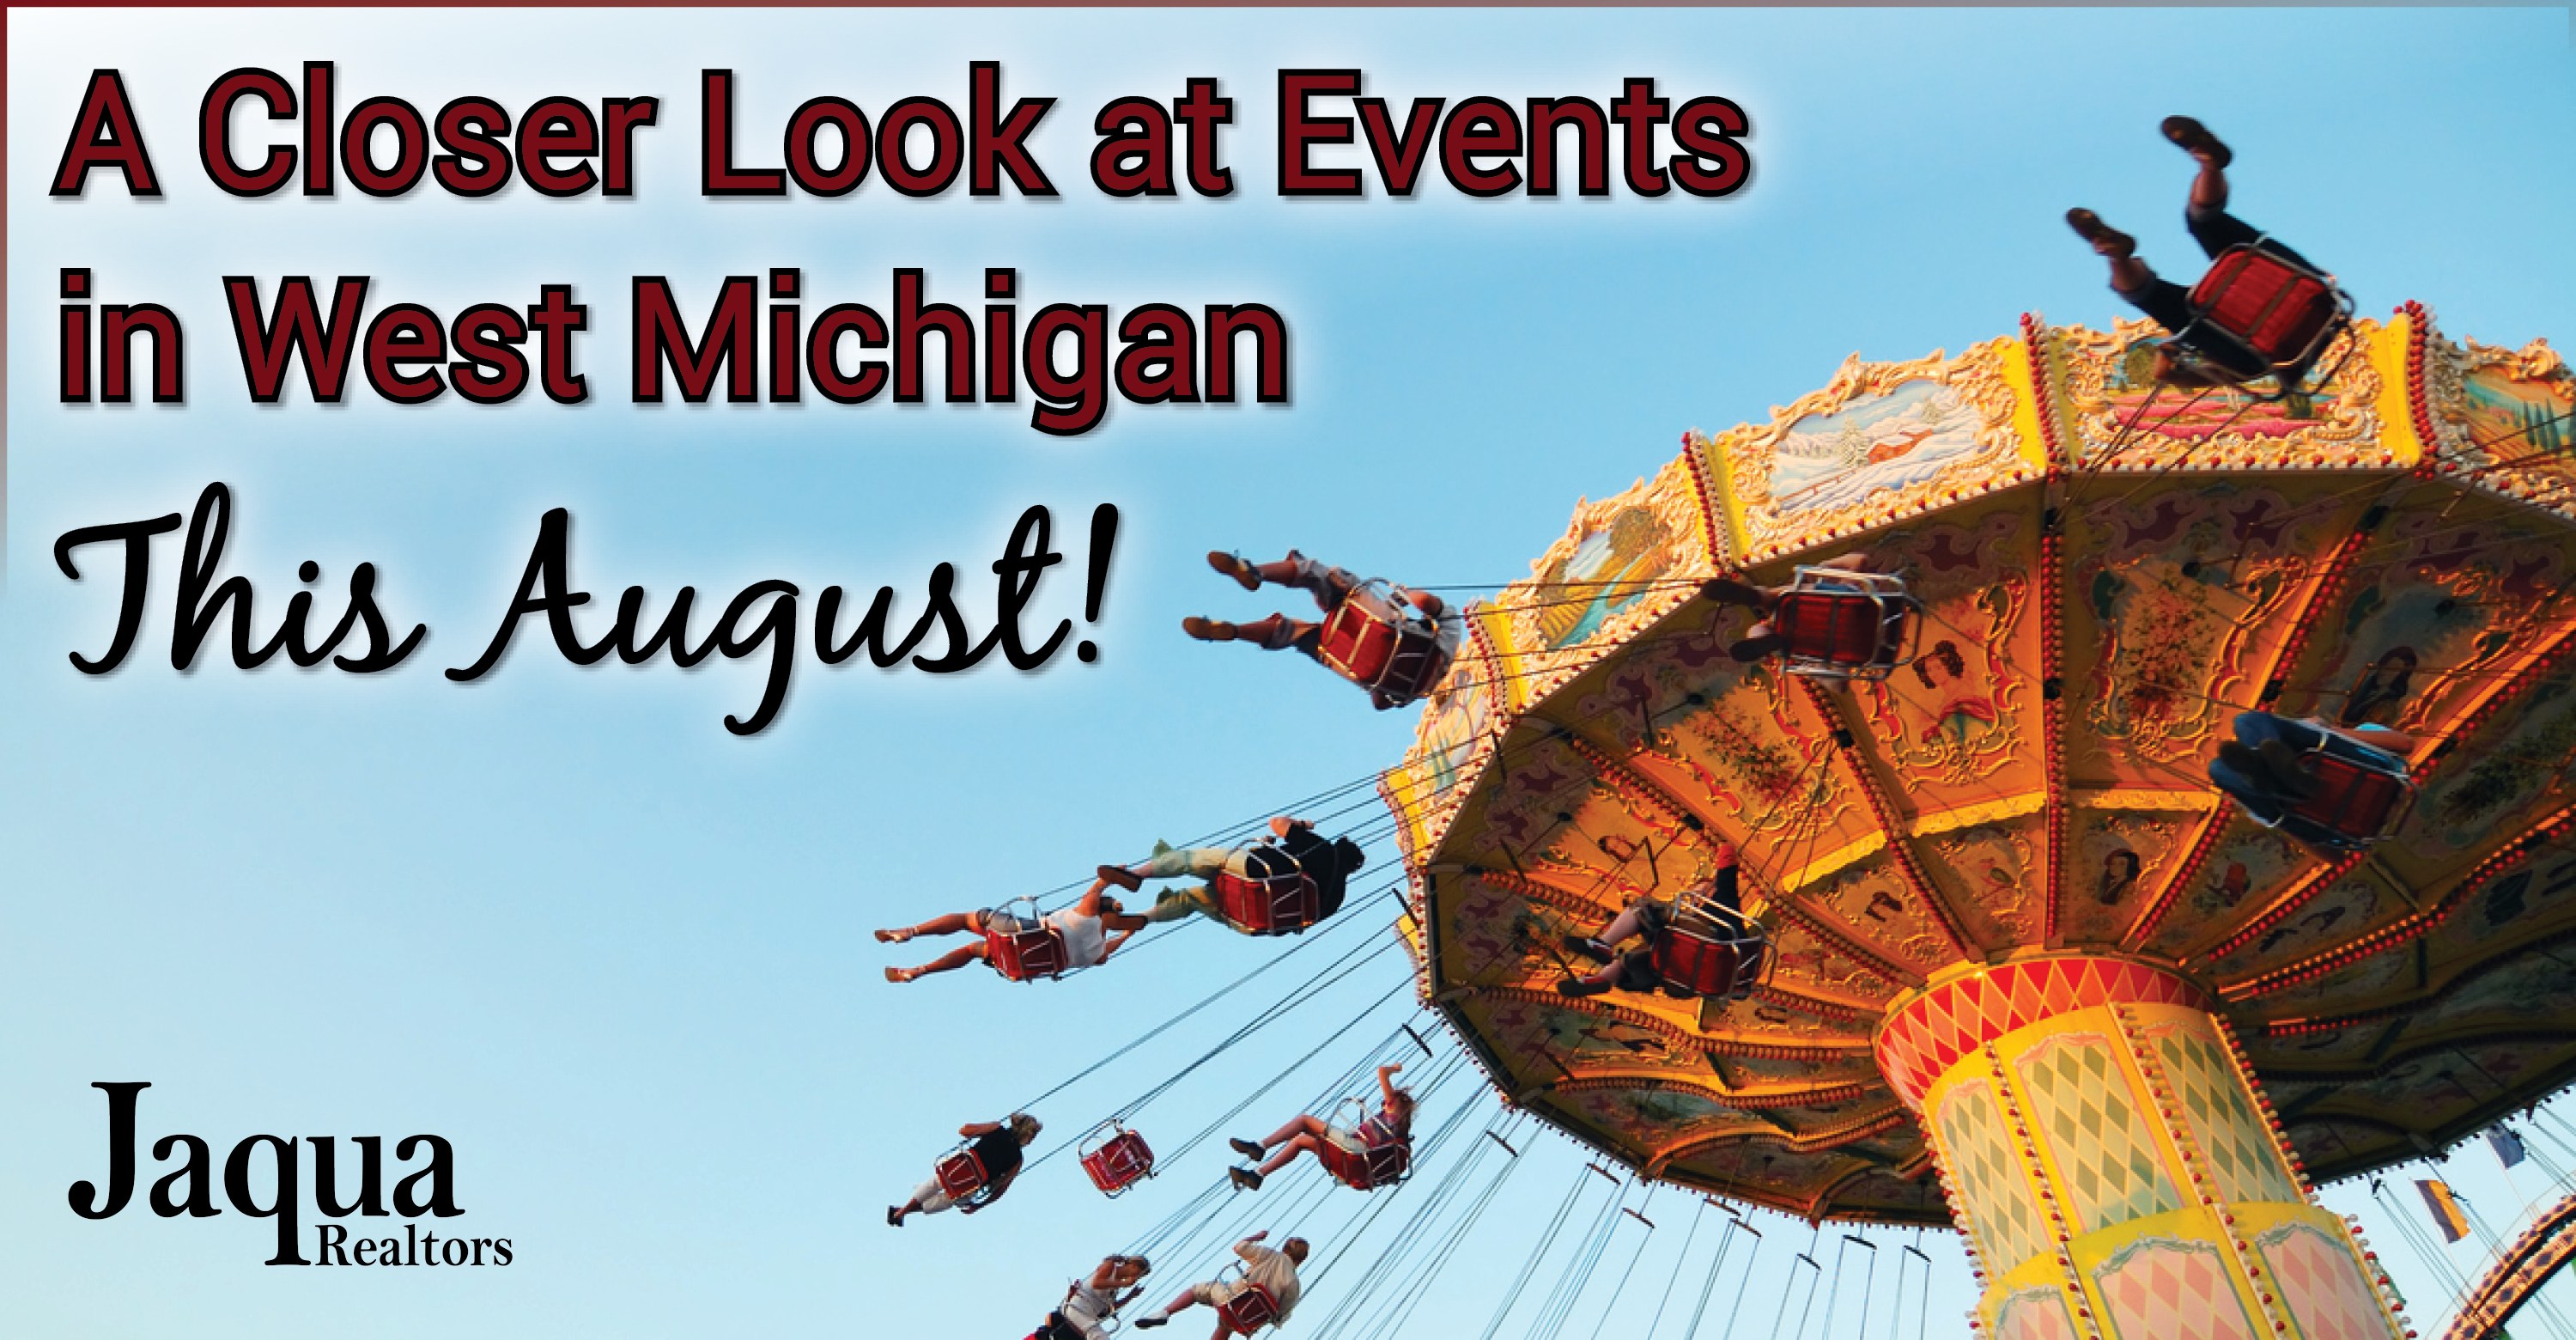 A Closer Look at Events in West Michigan This August!